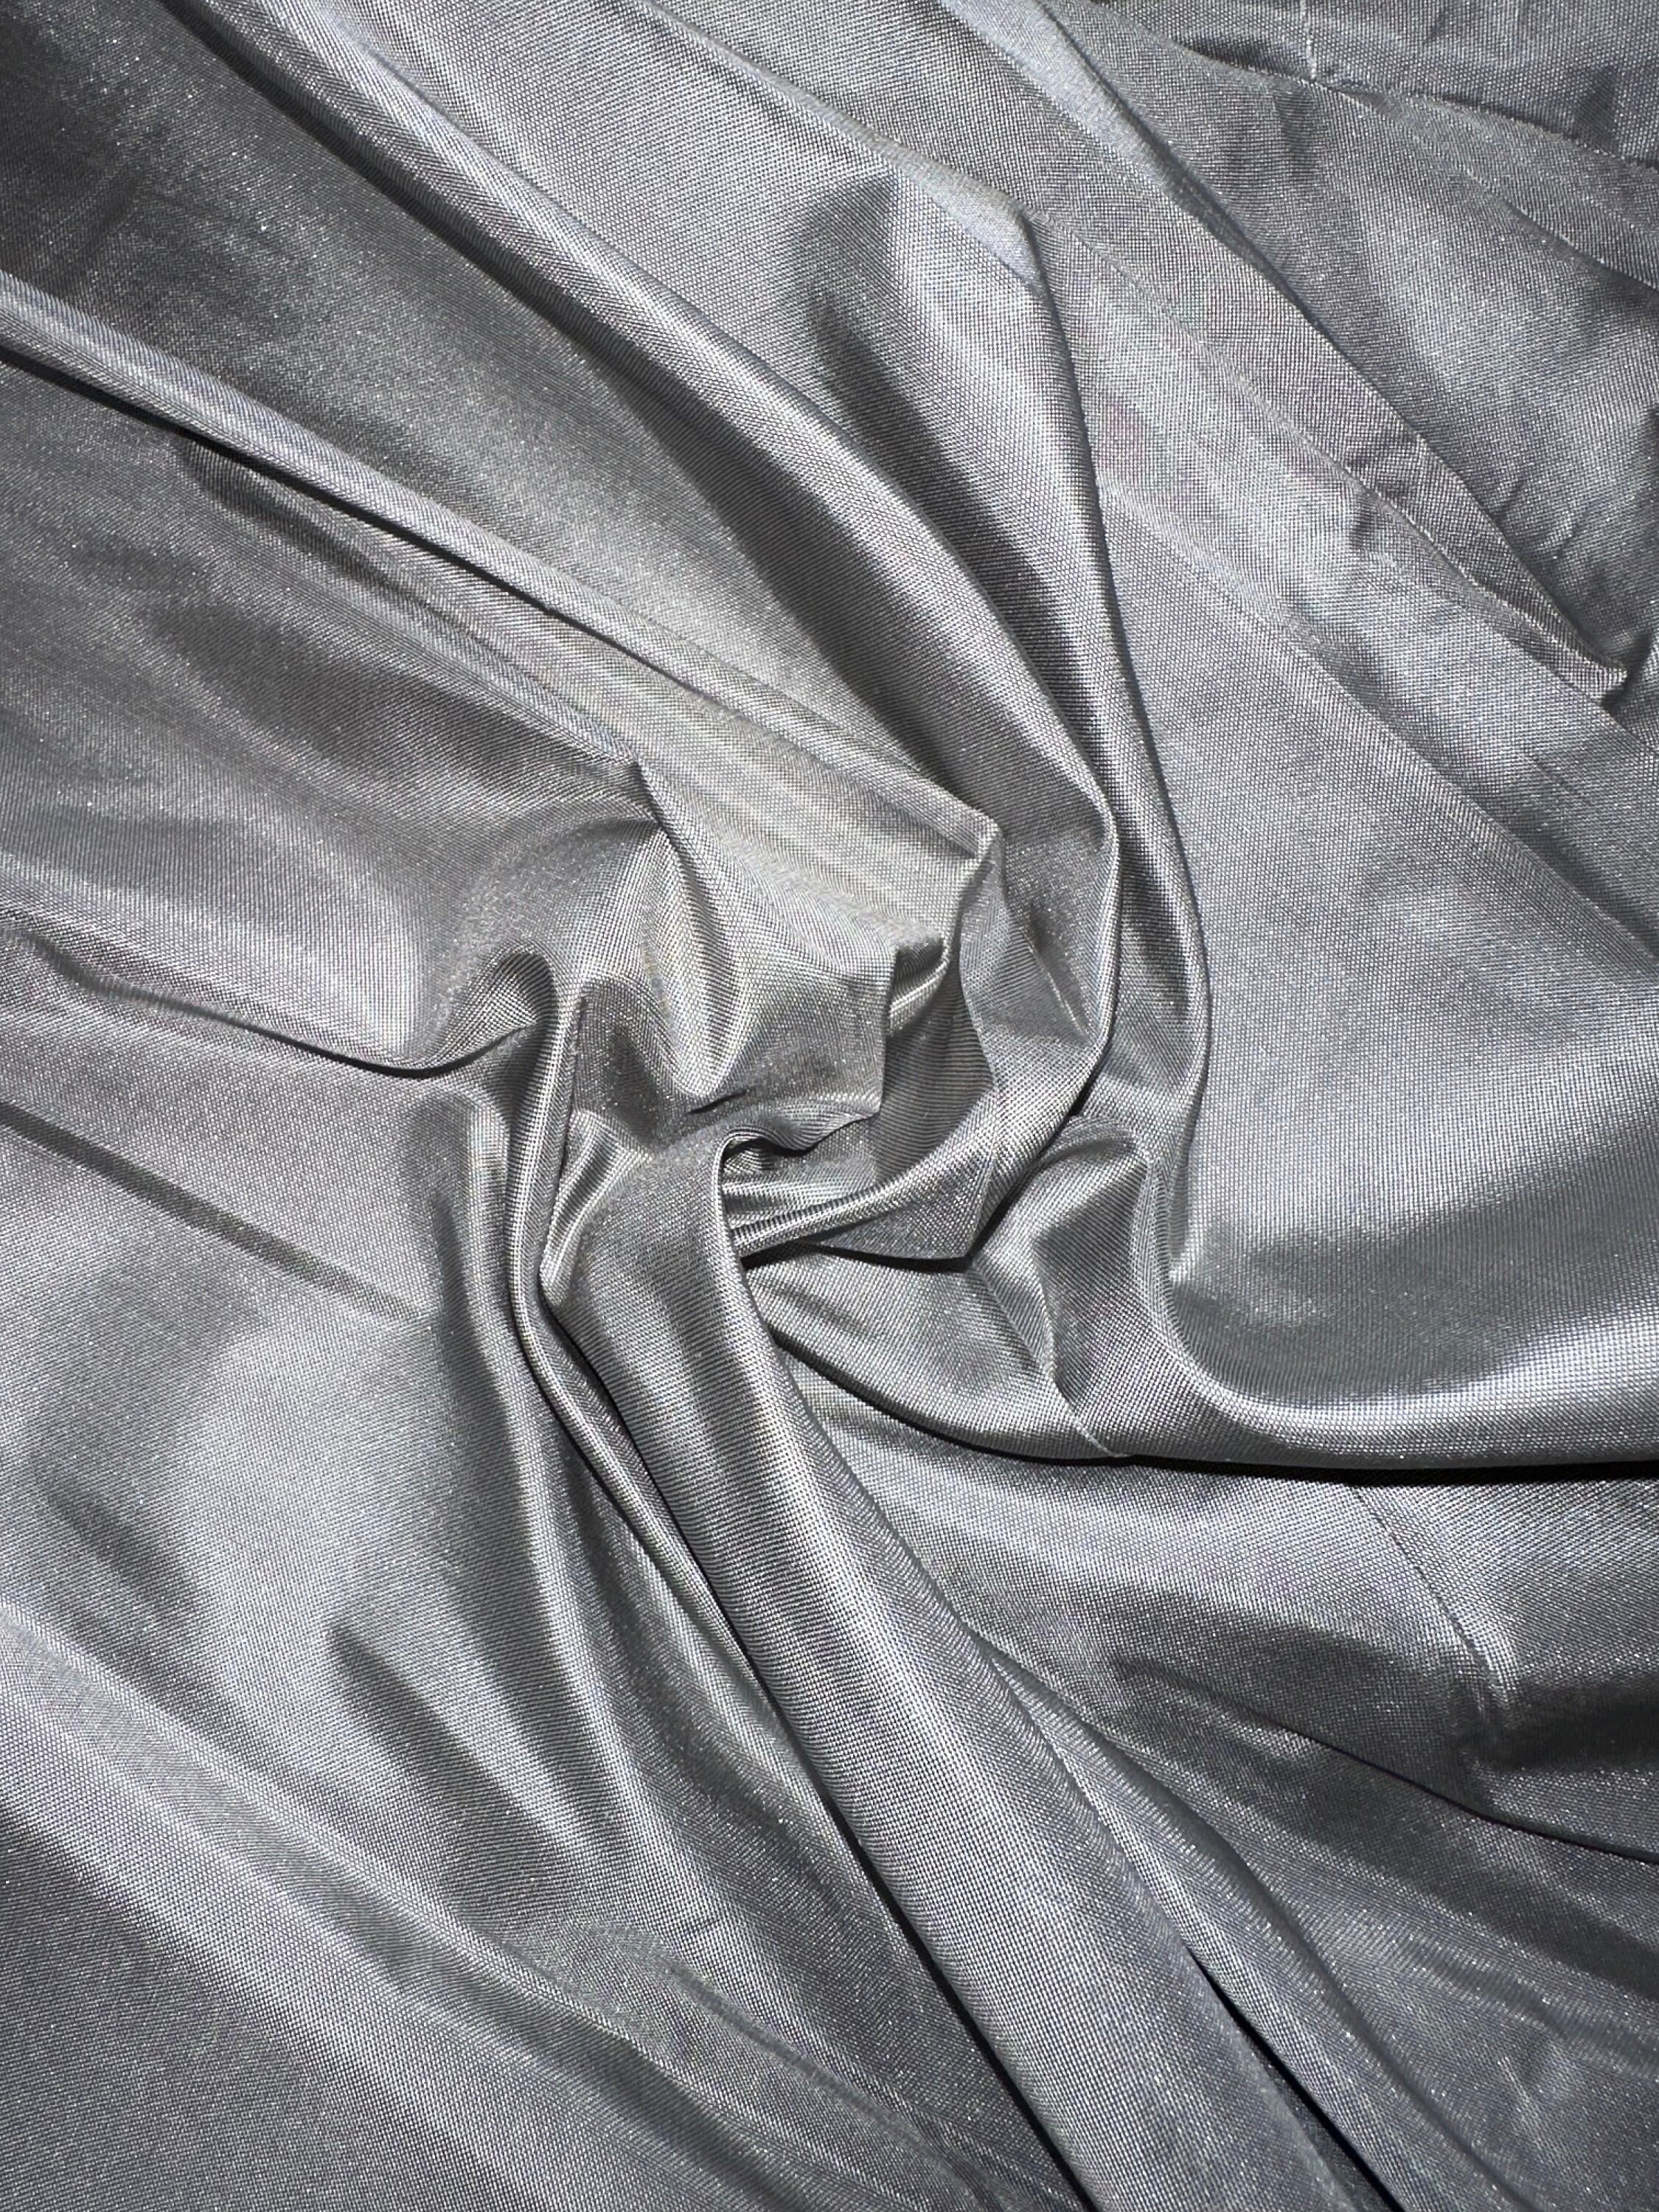 Pewter Soft Patina Upholstery leather for Furniture Coverings, Pebble Cow  Leather, Genuine Italian Skins for Crafts and DIY, Dollaro Leather